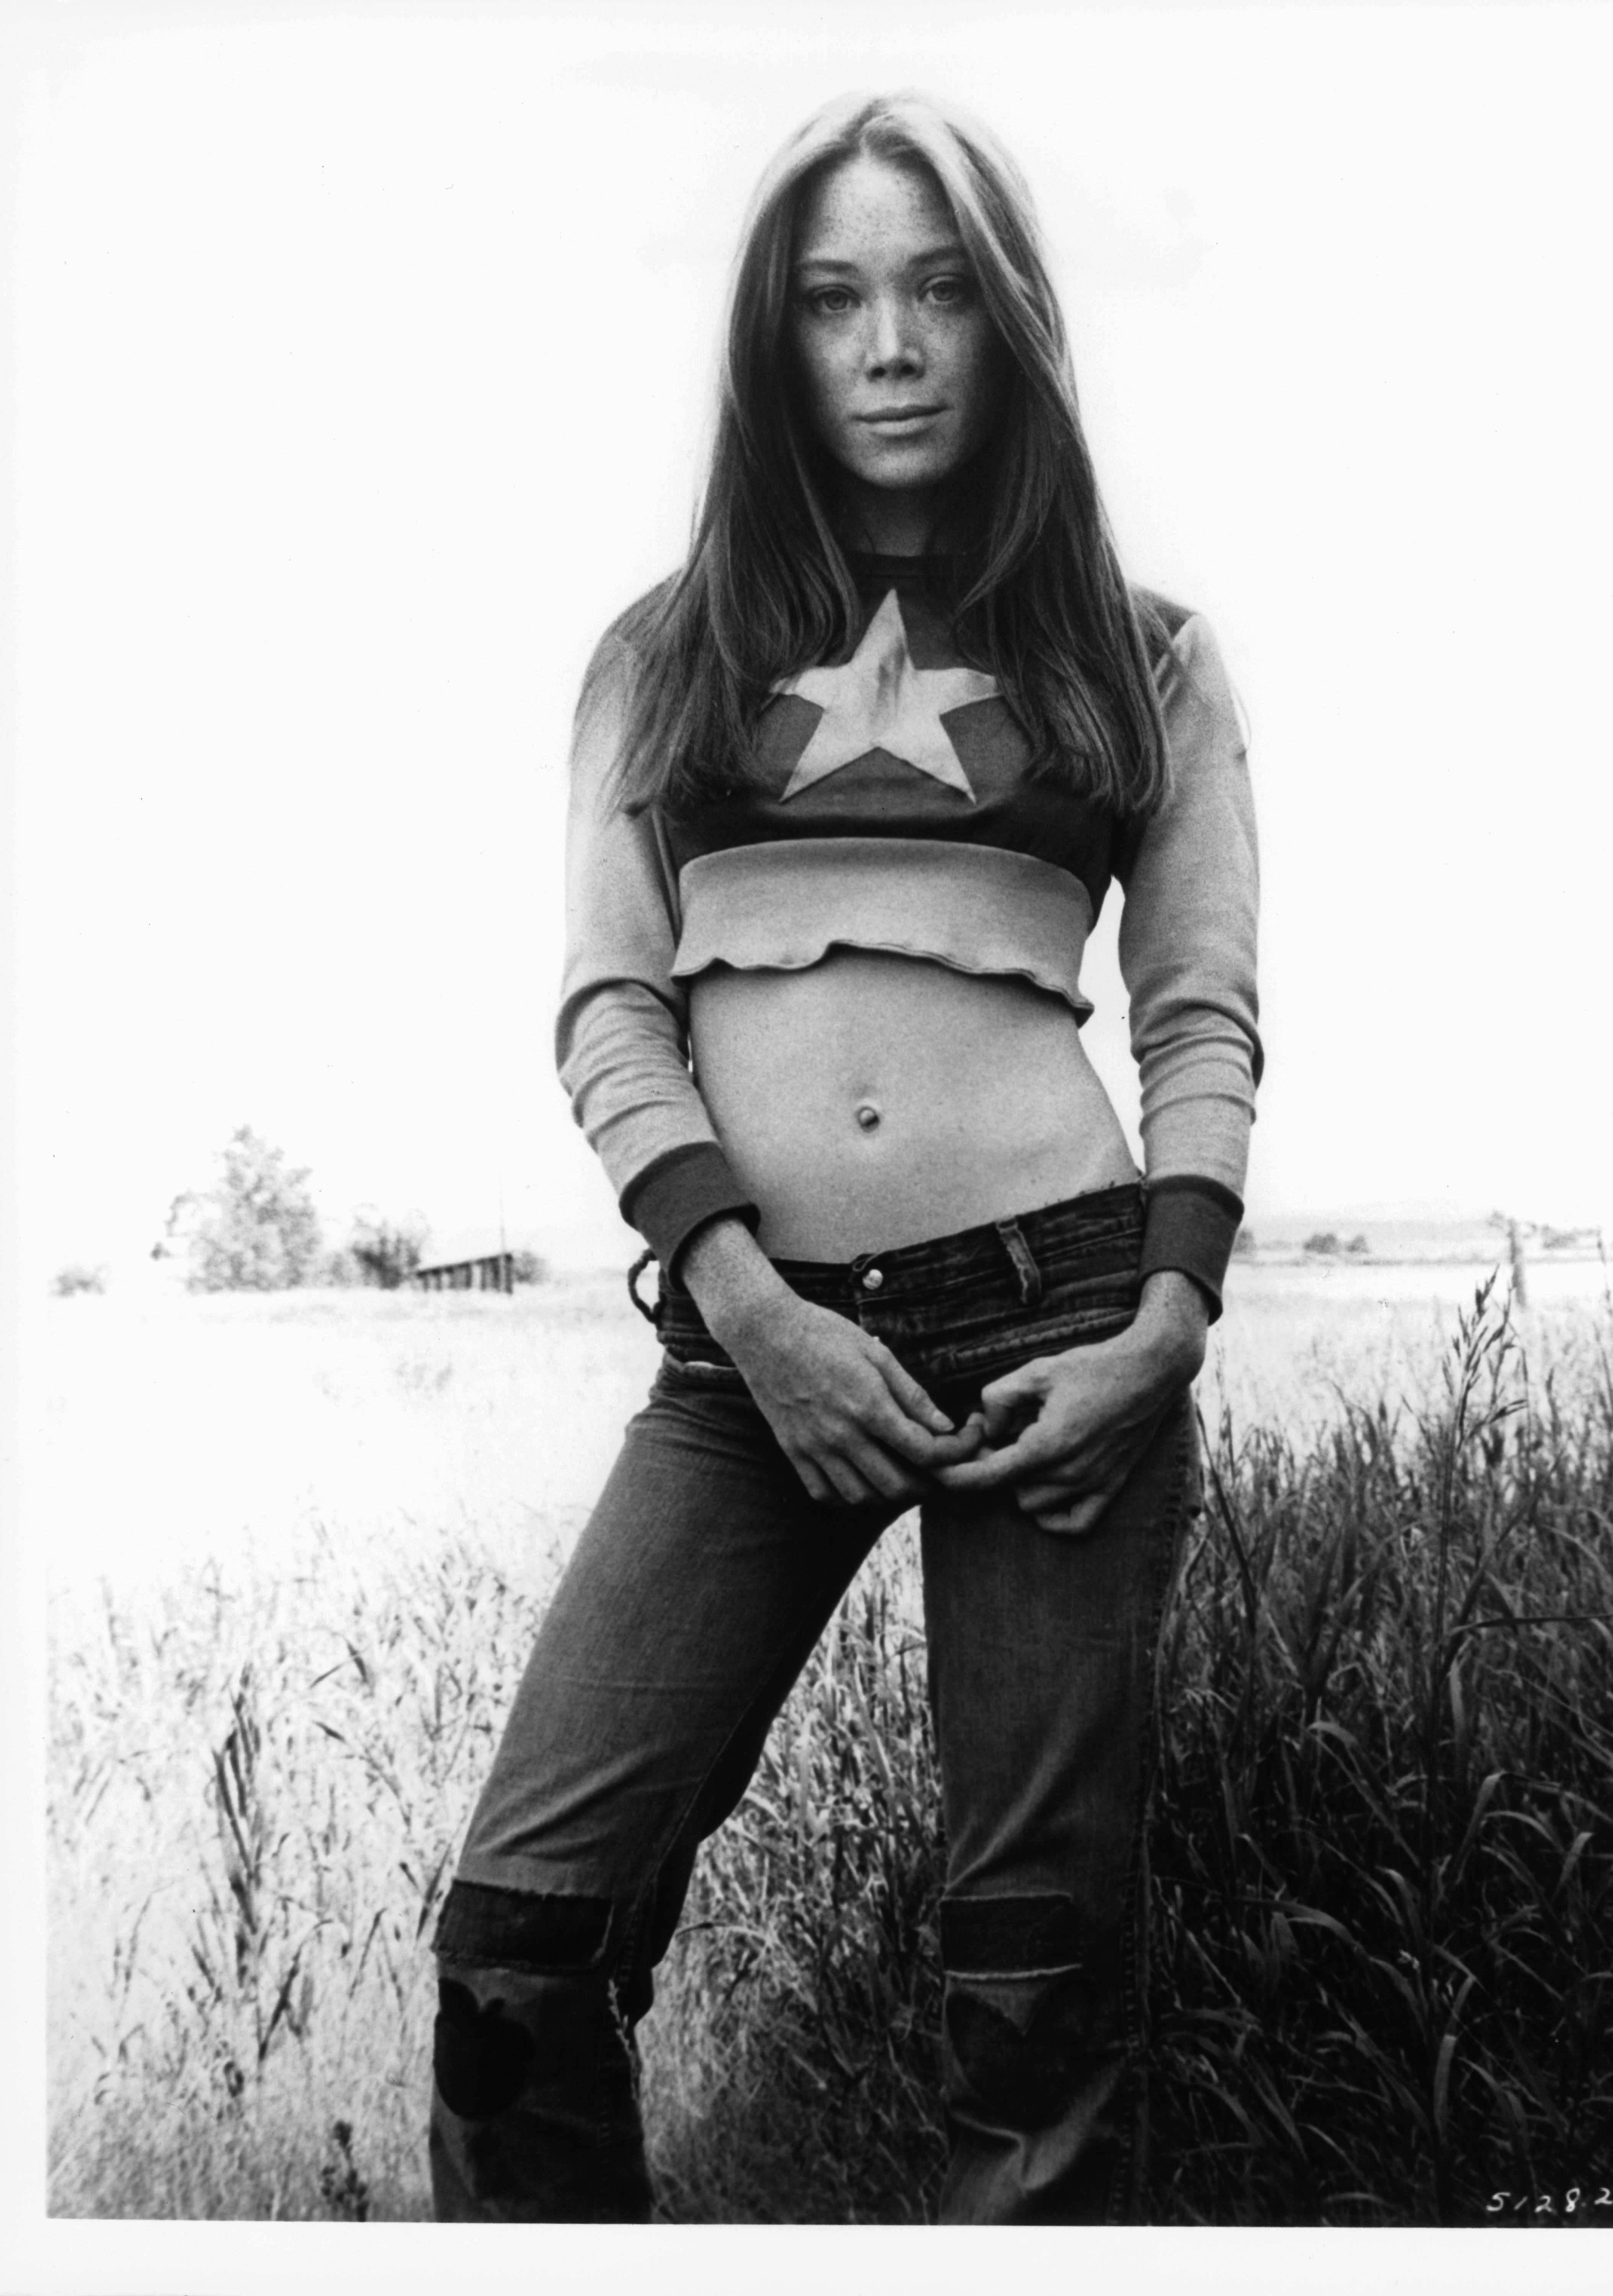 Sissy Spacek as Poppy in the movie "Prime Cut," on January 1, 1972 | Source: Getty Images